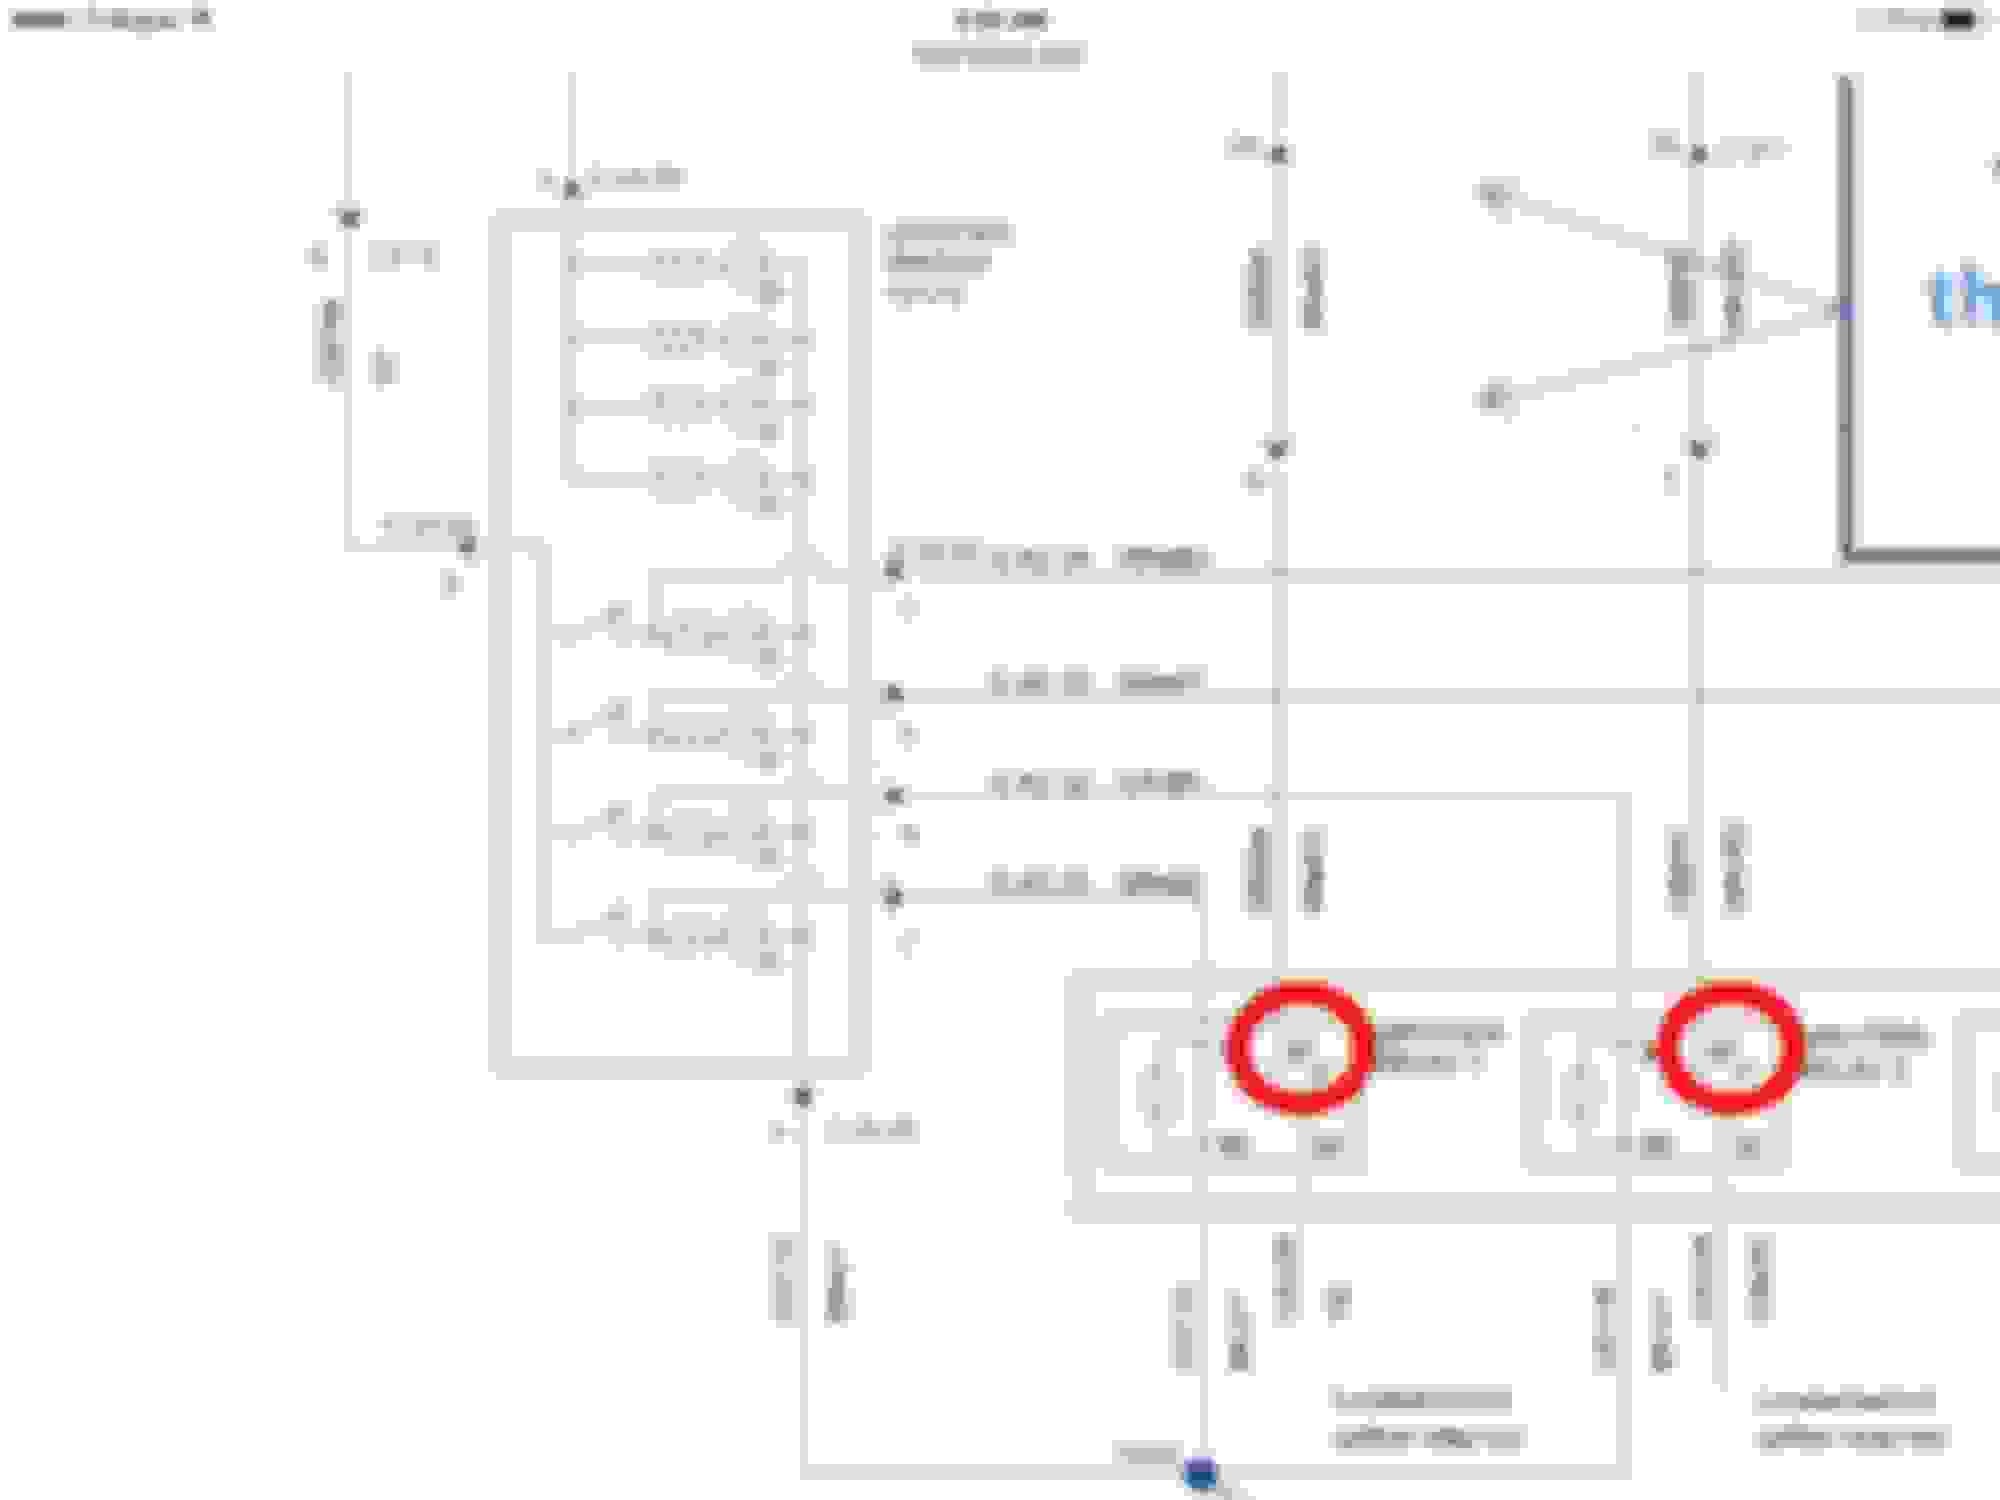 Ford Upfitter Switch Wiring Diagram 2011 ford Upfitter Guide Of Ford Upfitter Switch Wiring Diagram 2011